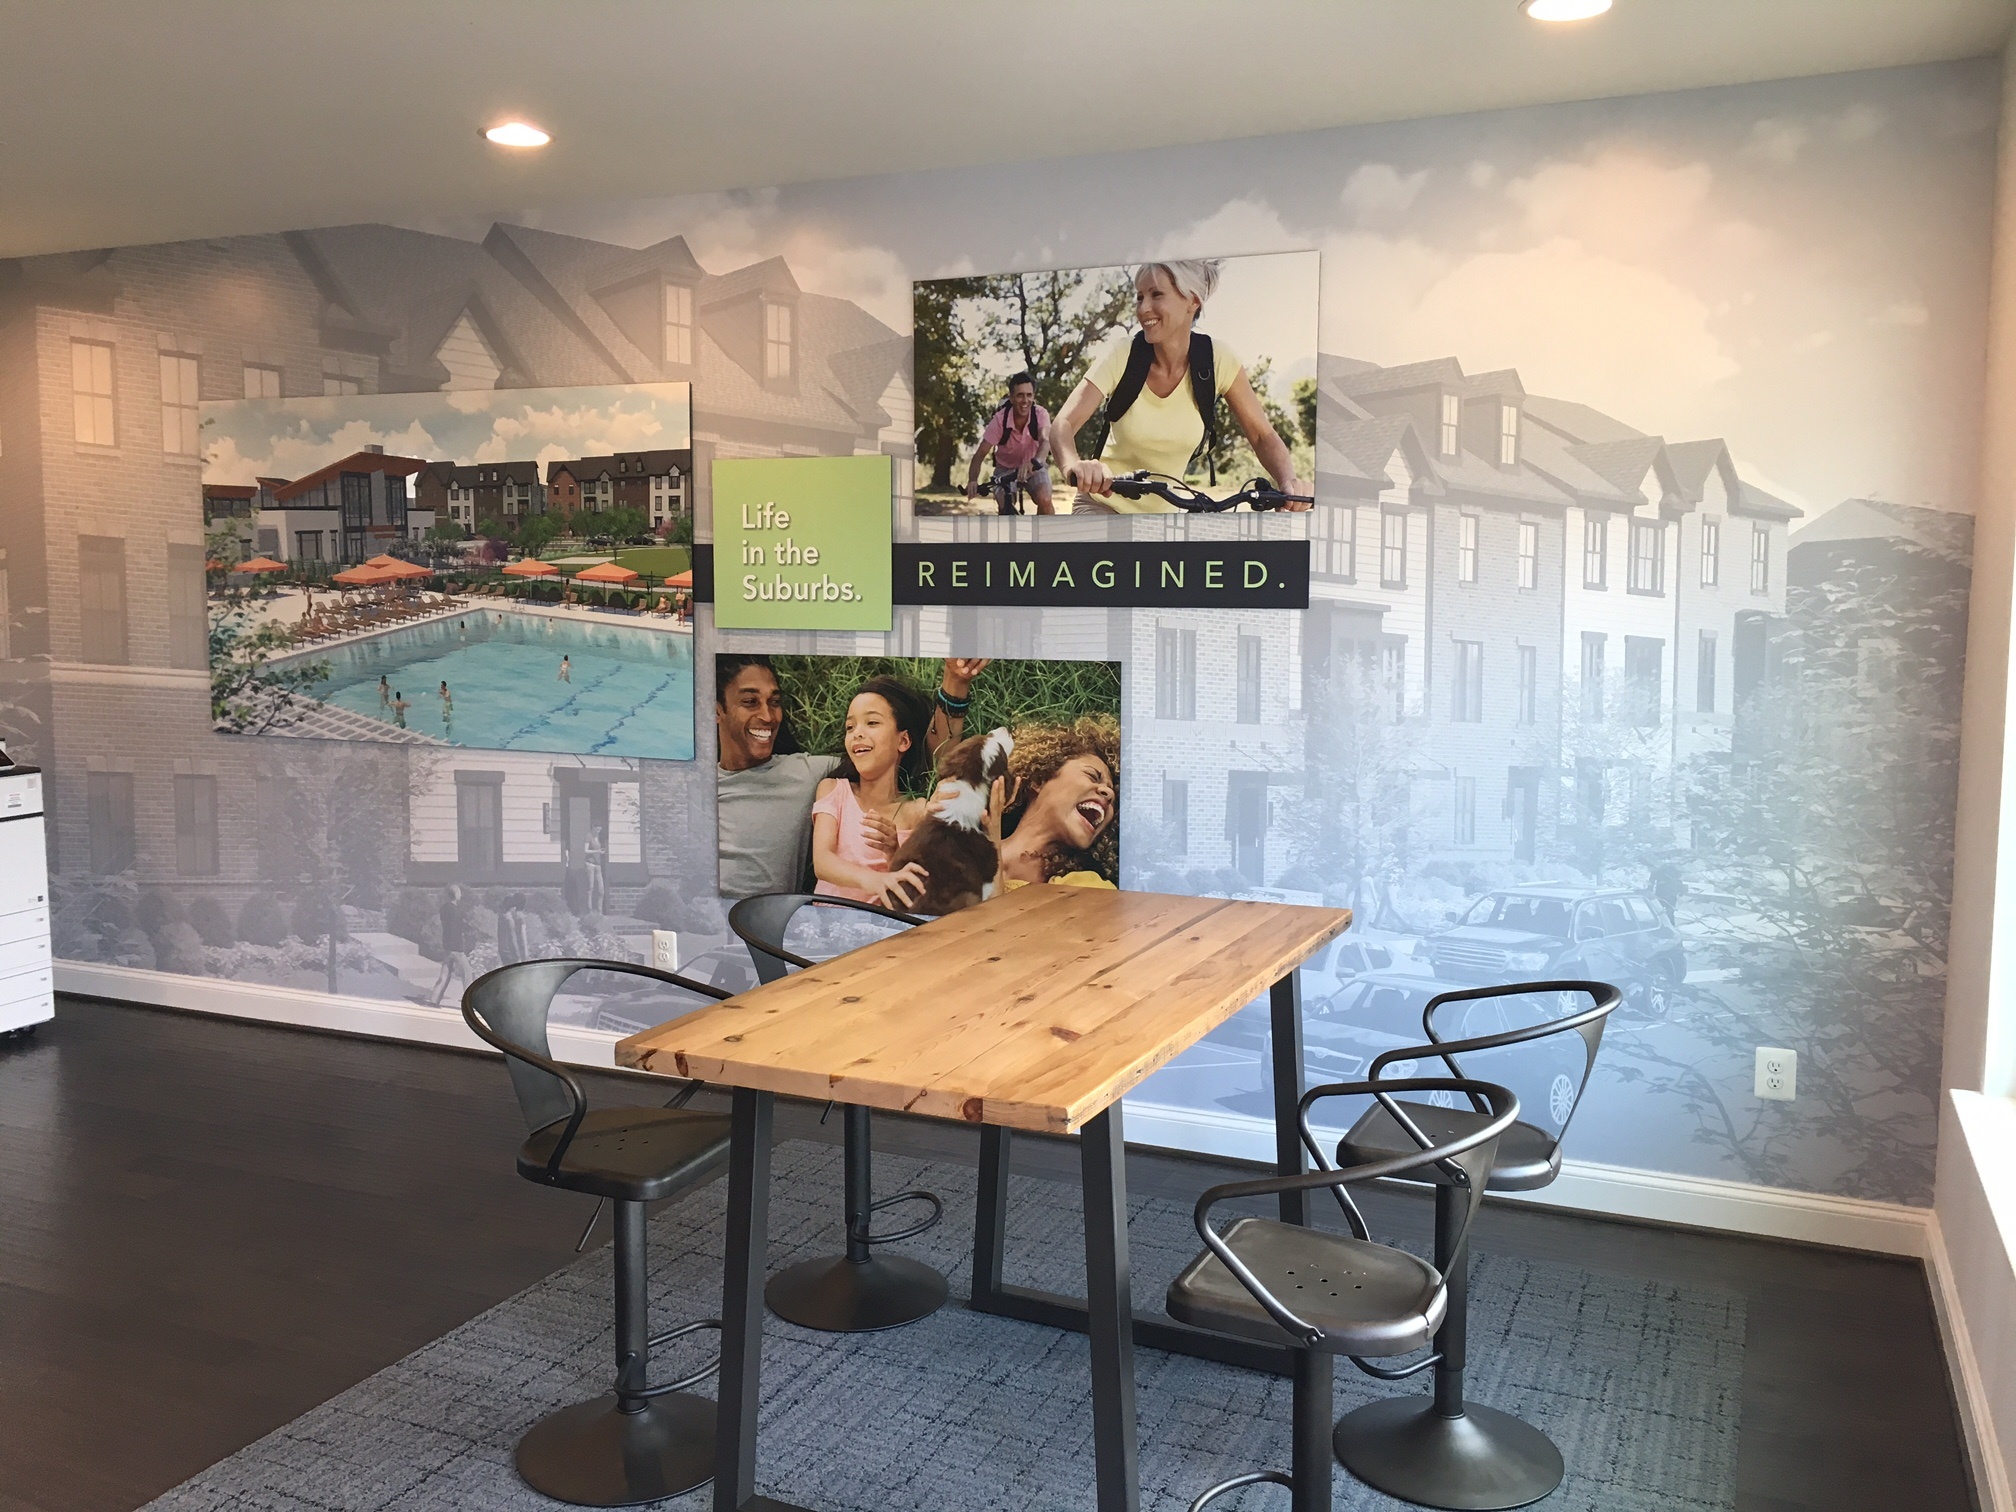 Large Format Wall Graphics | Ironmark, Annapolis Junction, MD